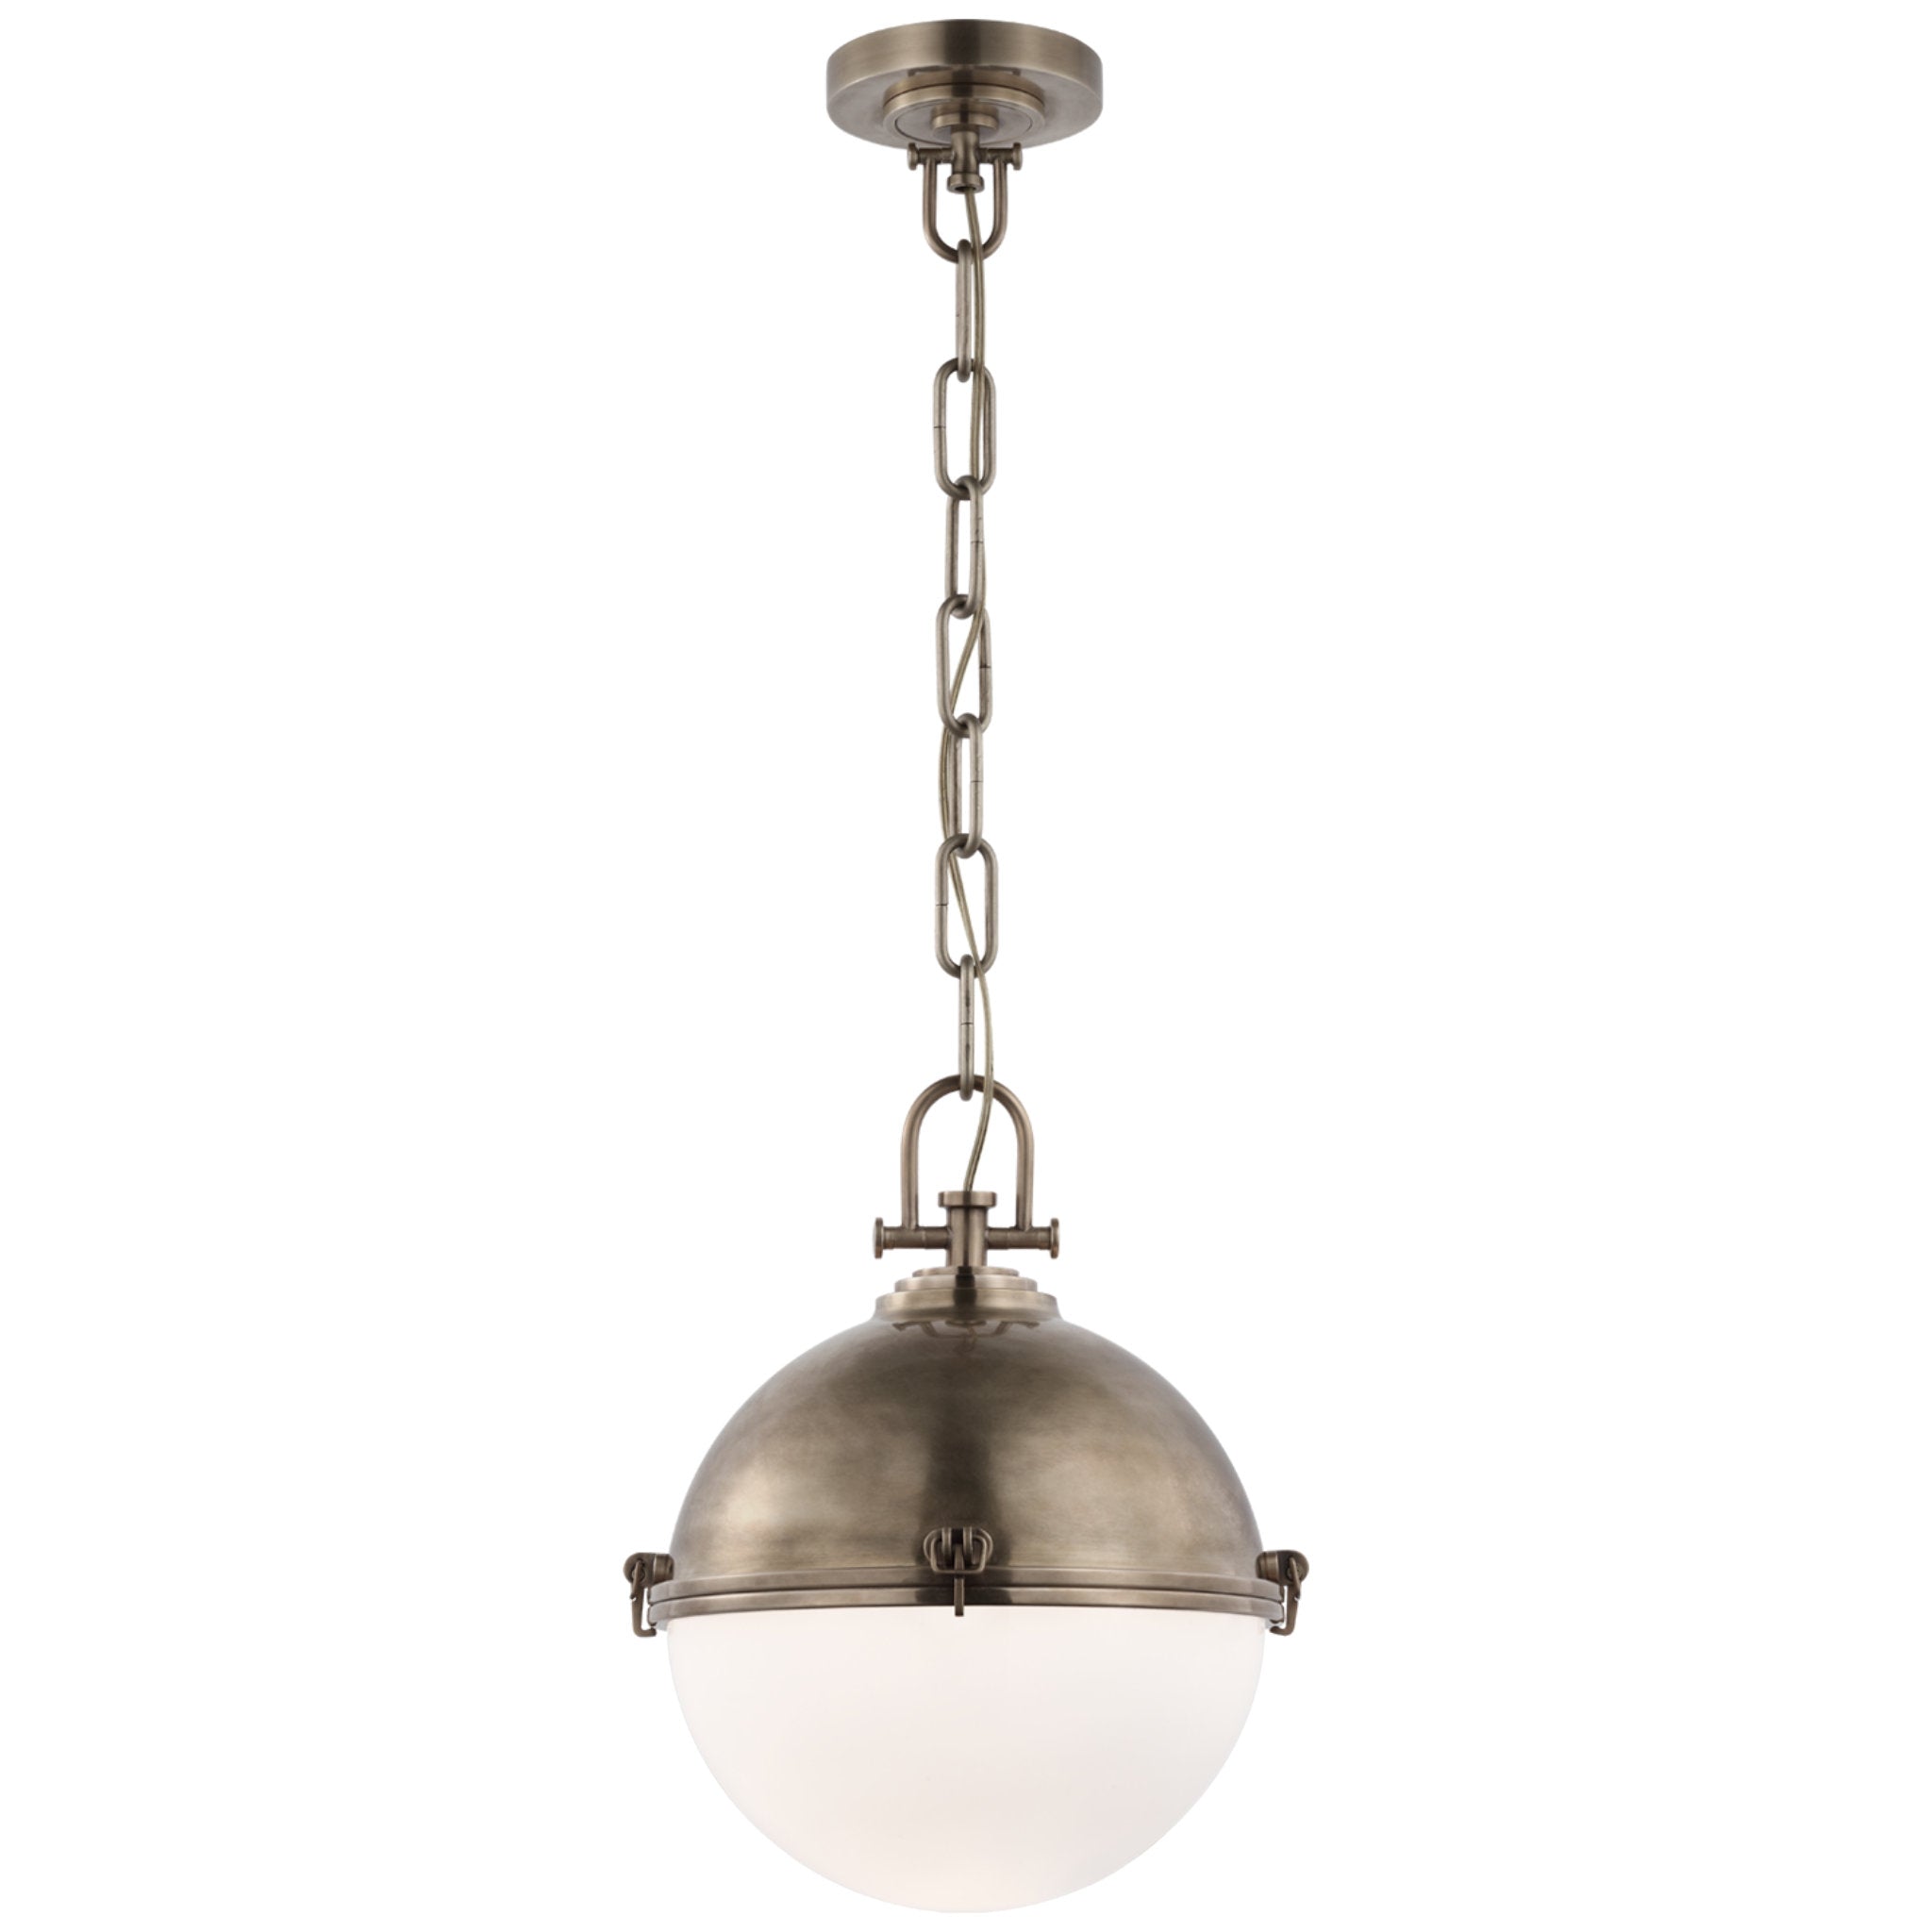 Chapman & Myers Adrian Large Globe Pendant in Antique Nickel with White Glass